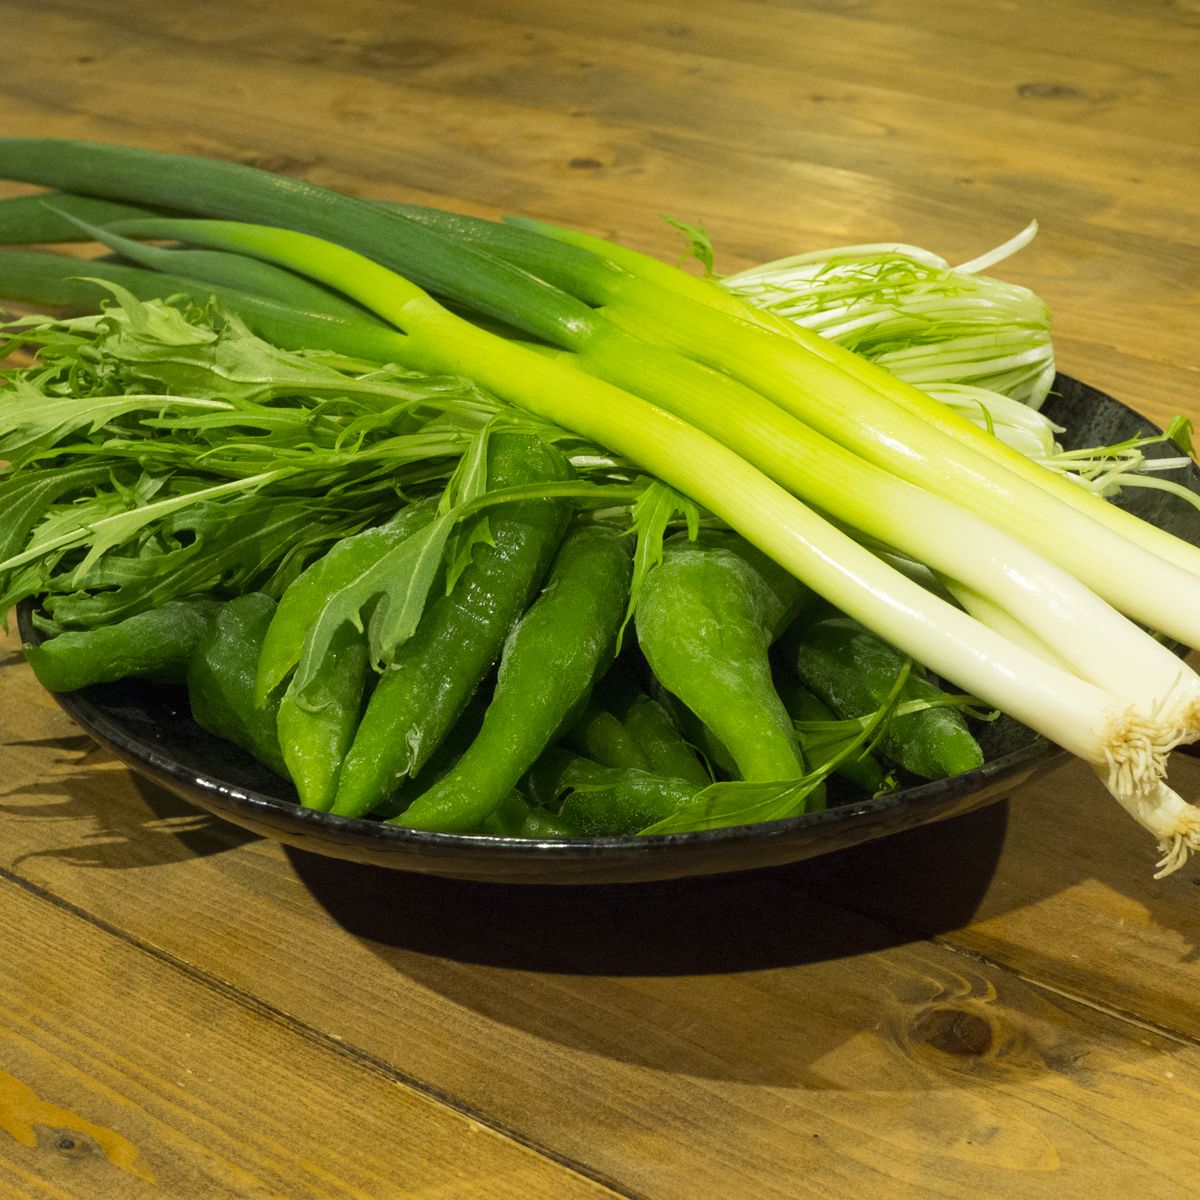 Vegetables that give you a taste of Kyoto